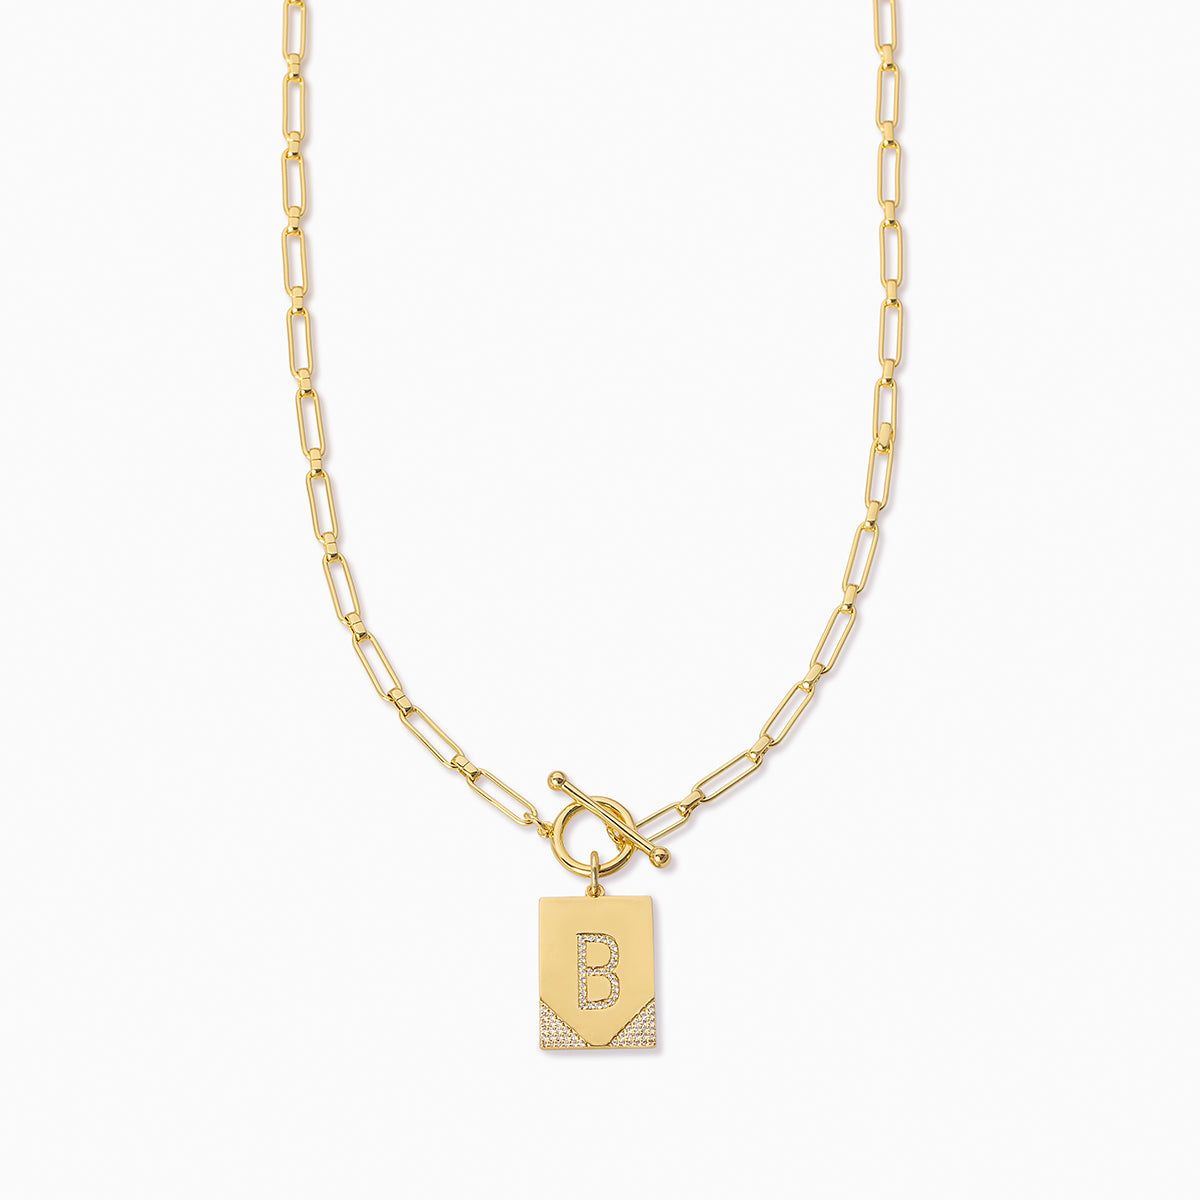 Leave Your Mark Chain Necklace | Gold  B | Product Image | Uncommon James